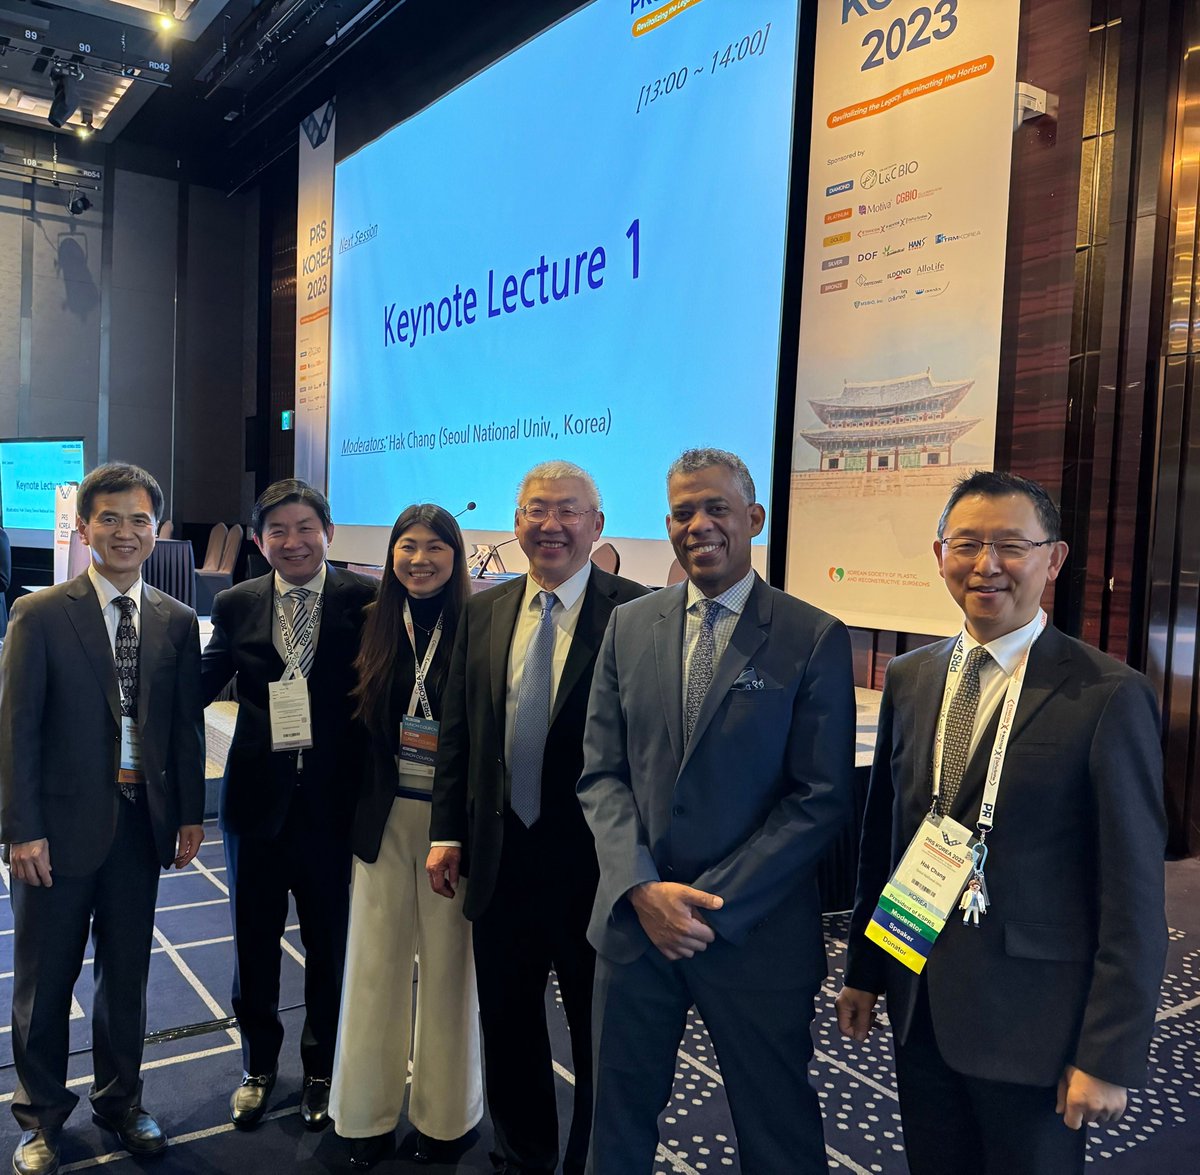 #PRSJournal Editor-in-Chief @kecchung, @ASPSMembers President Steven Williams and more representing the Journal and our Society at PRS Korea, the annual meeting of the Korean Society of Plastic Surgeons. PRS is your Academic home!